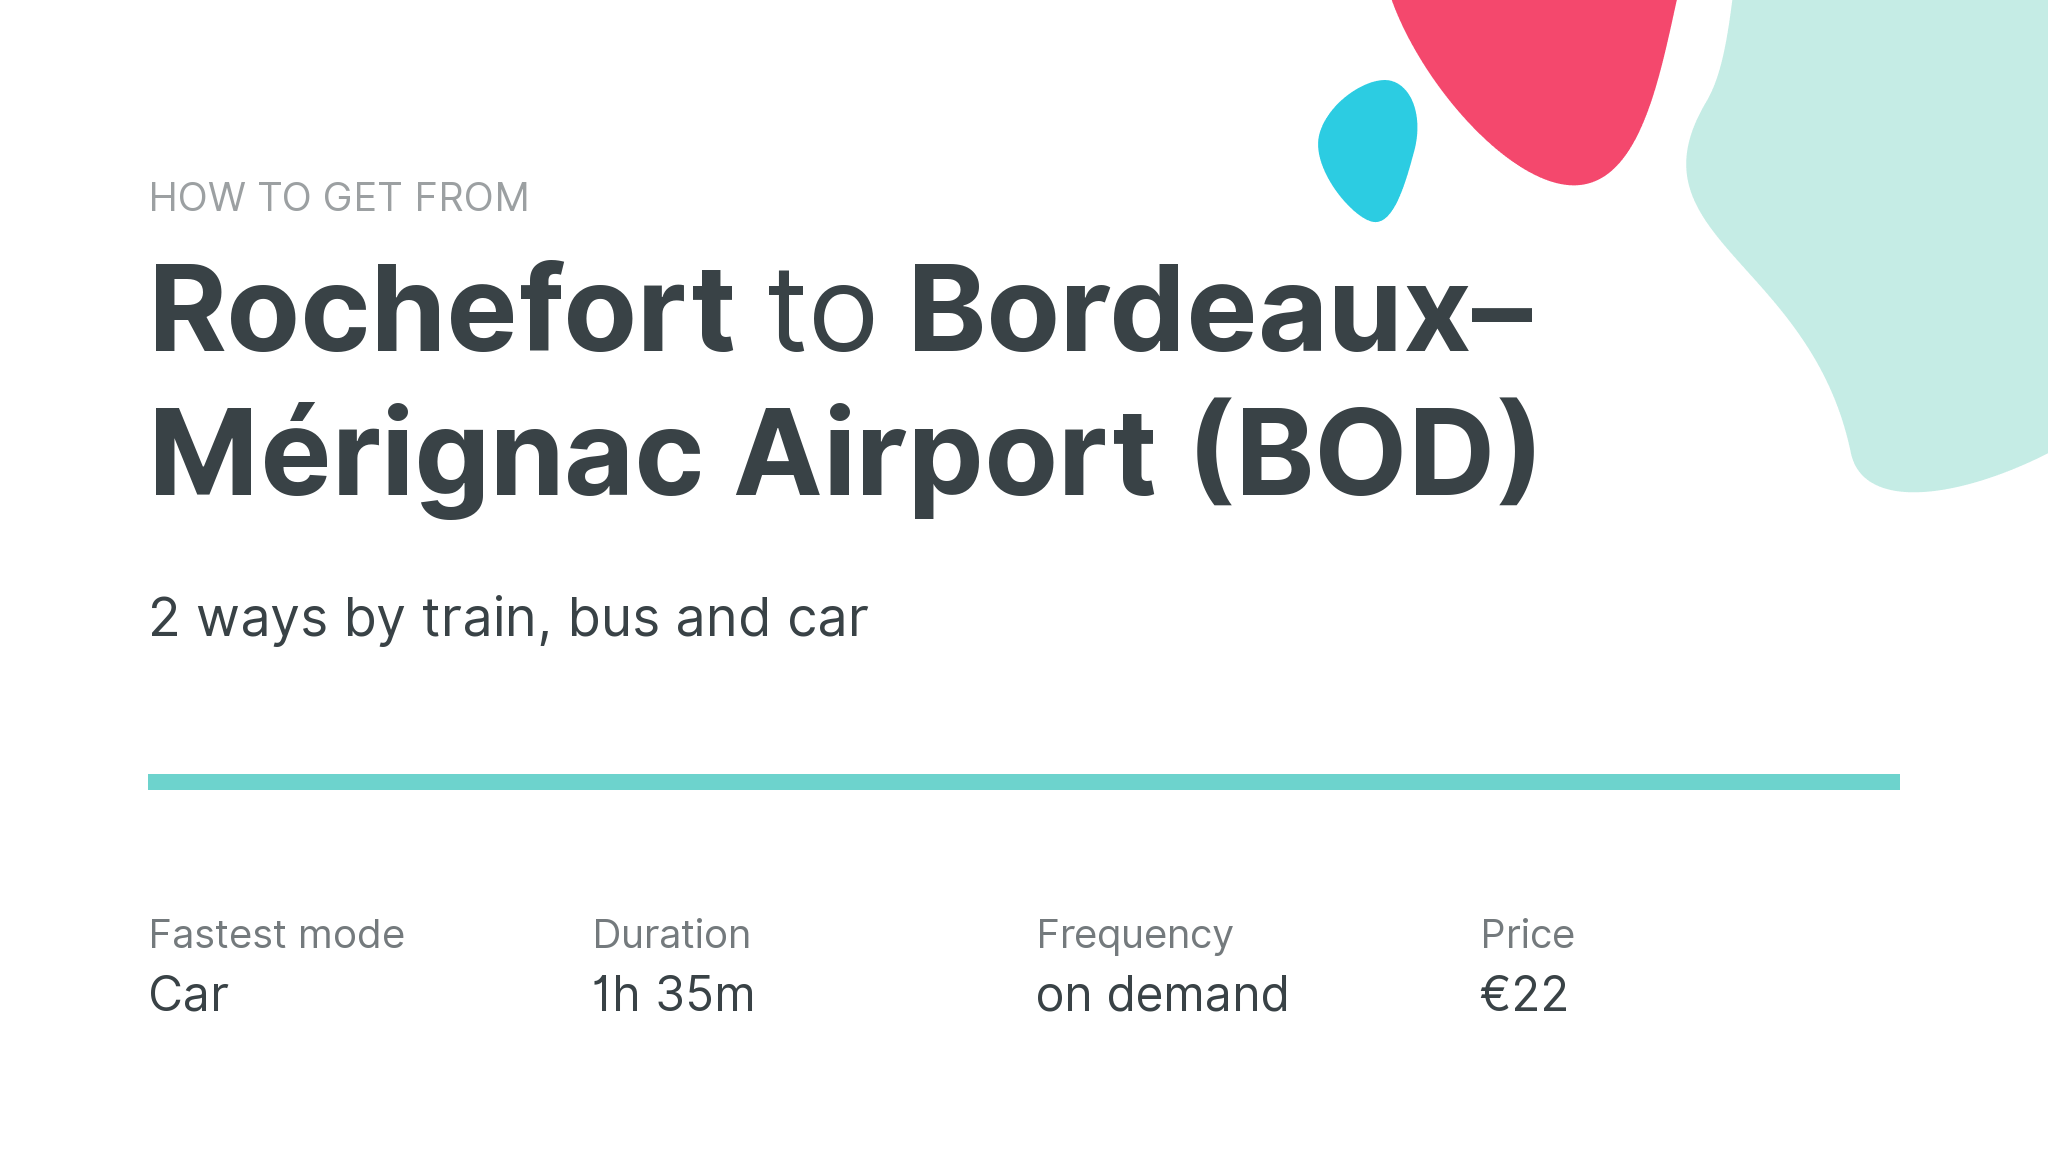 How do I get from Rochefort to Bordeaux–Mérignac Airport (BOD)